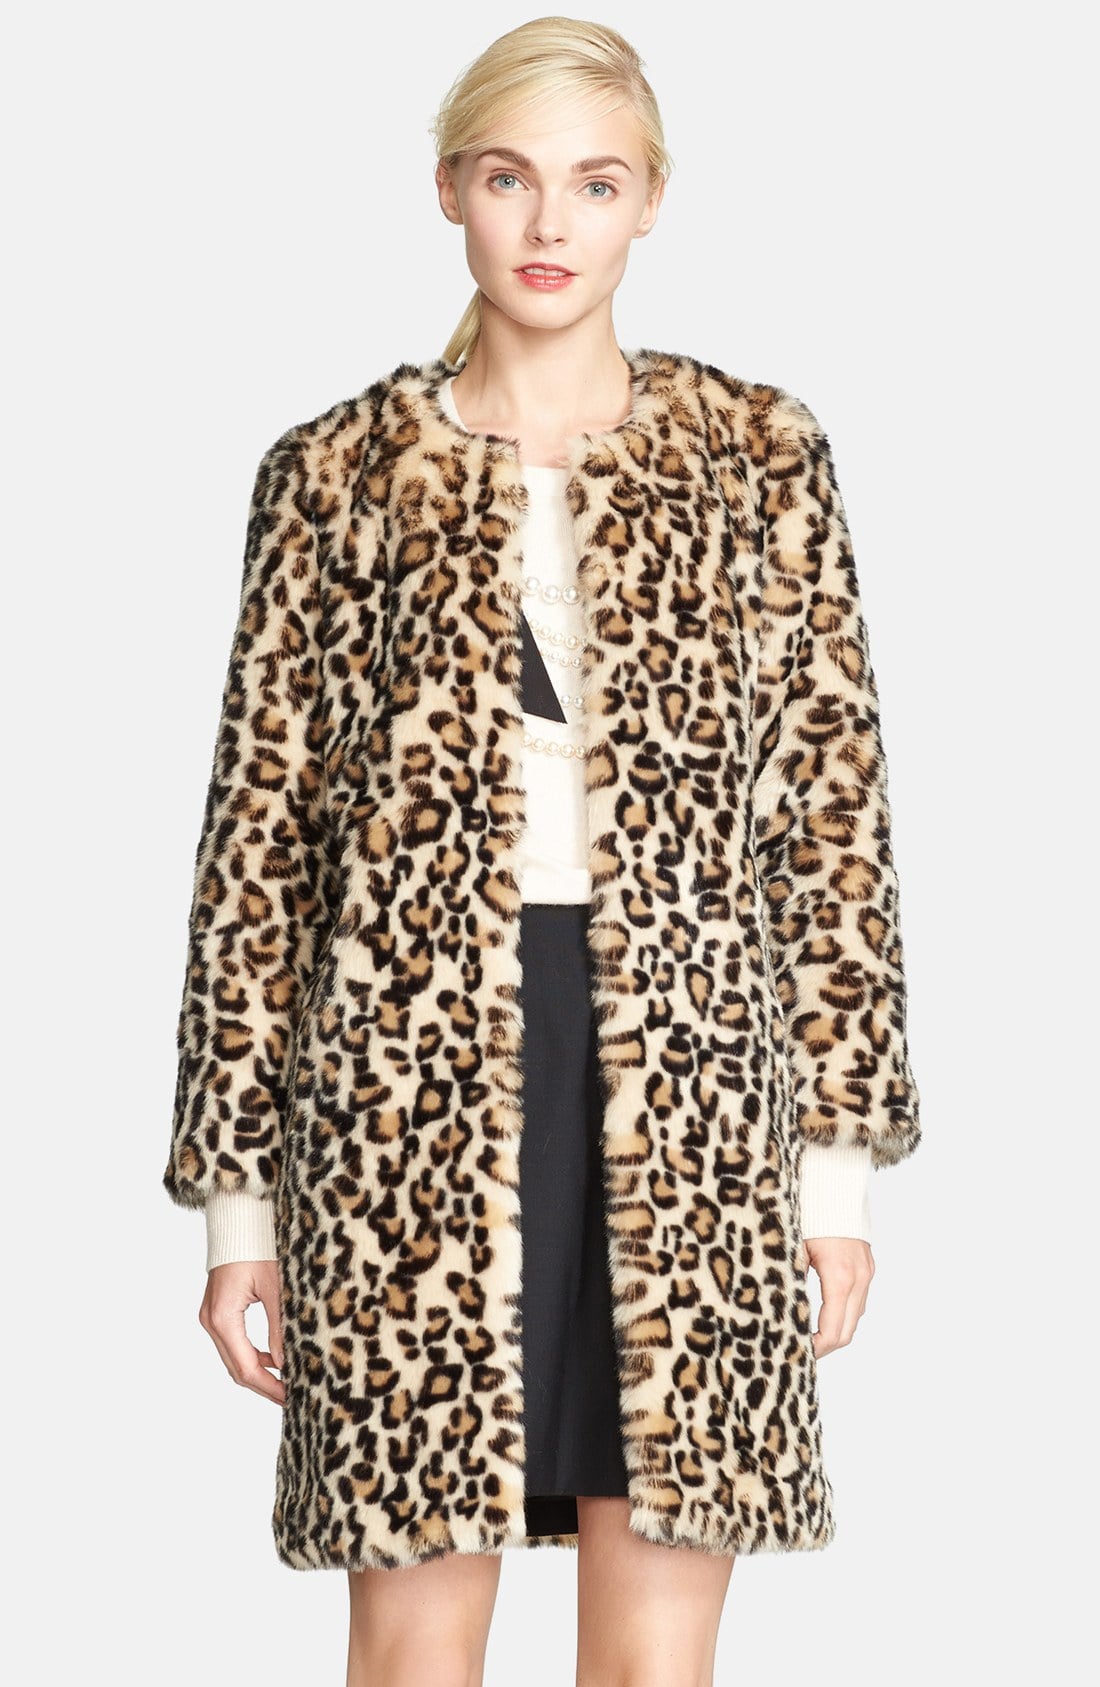 Kate Spade New York Rosalyn Faux Fur Coat ($898) | Here's How to Really  Rock That Furry Jacket | POPSUGAR Fashion Photo 36